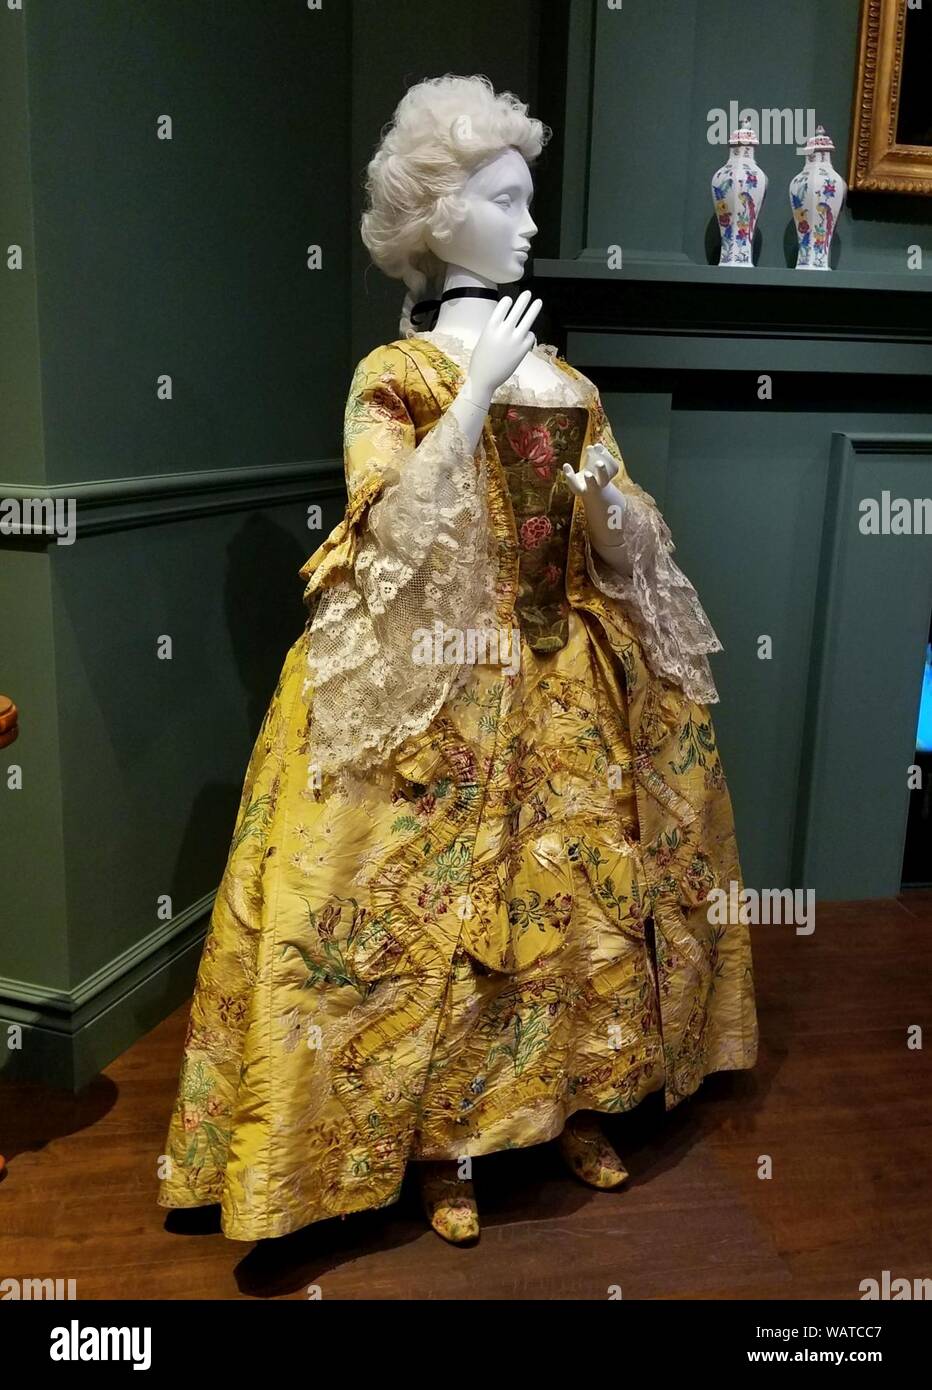 Dress and petticoat, England, c. 1745, restyled c. 1760, silk, with stomacher, early 1700s, silk and line, and ruffles, France, c. 1770, silk Stock Photo